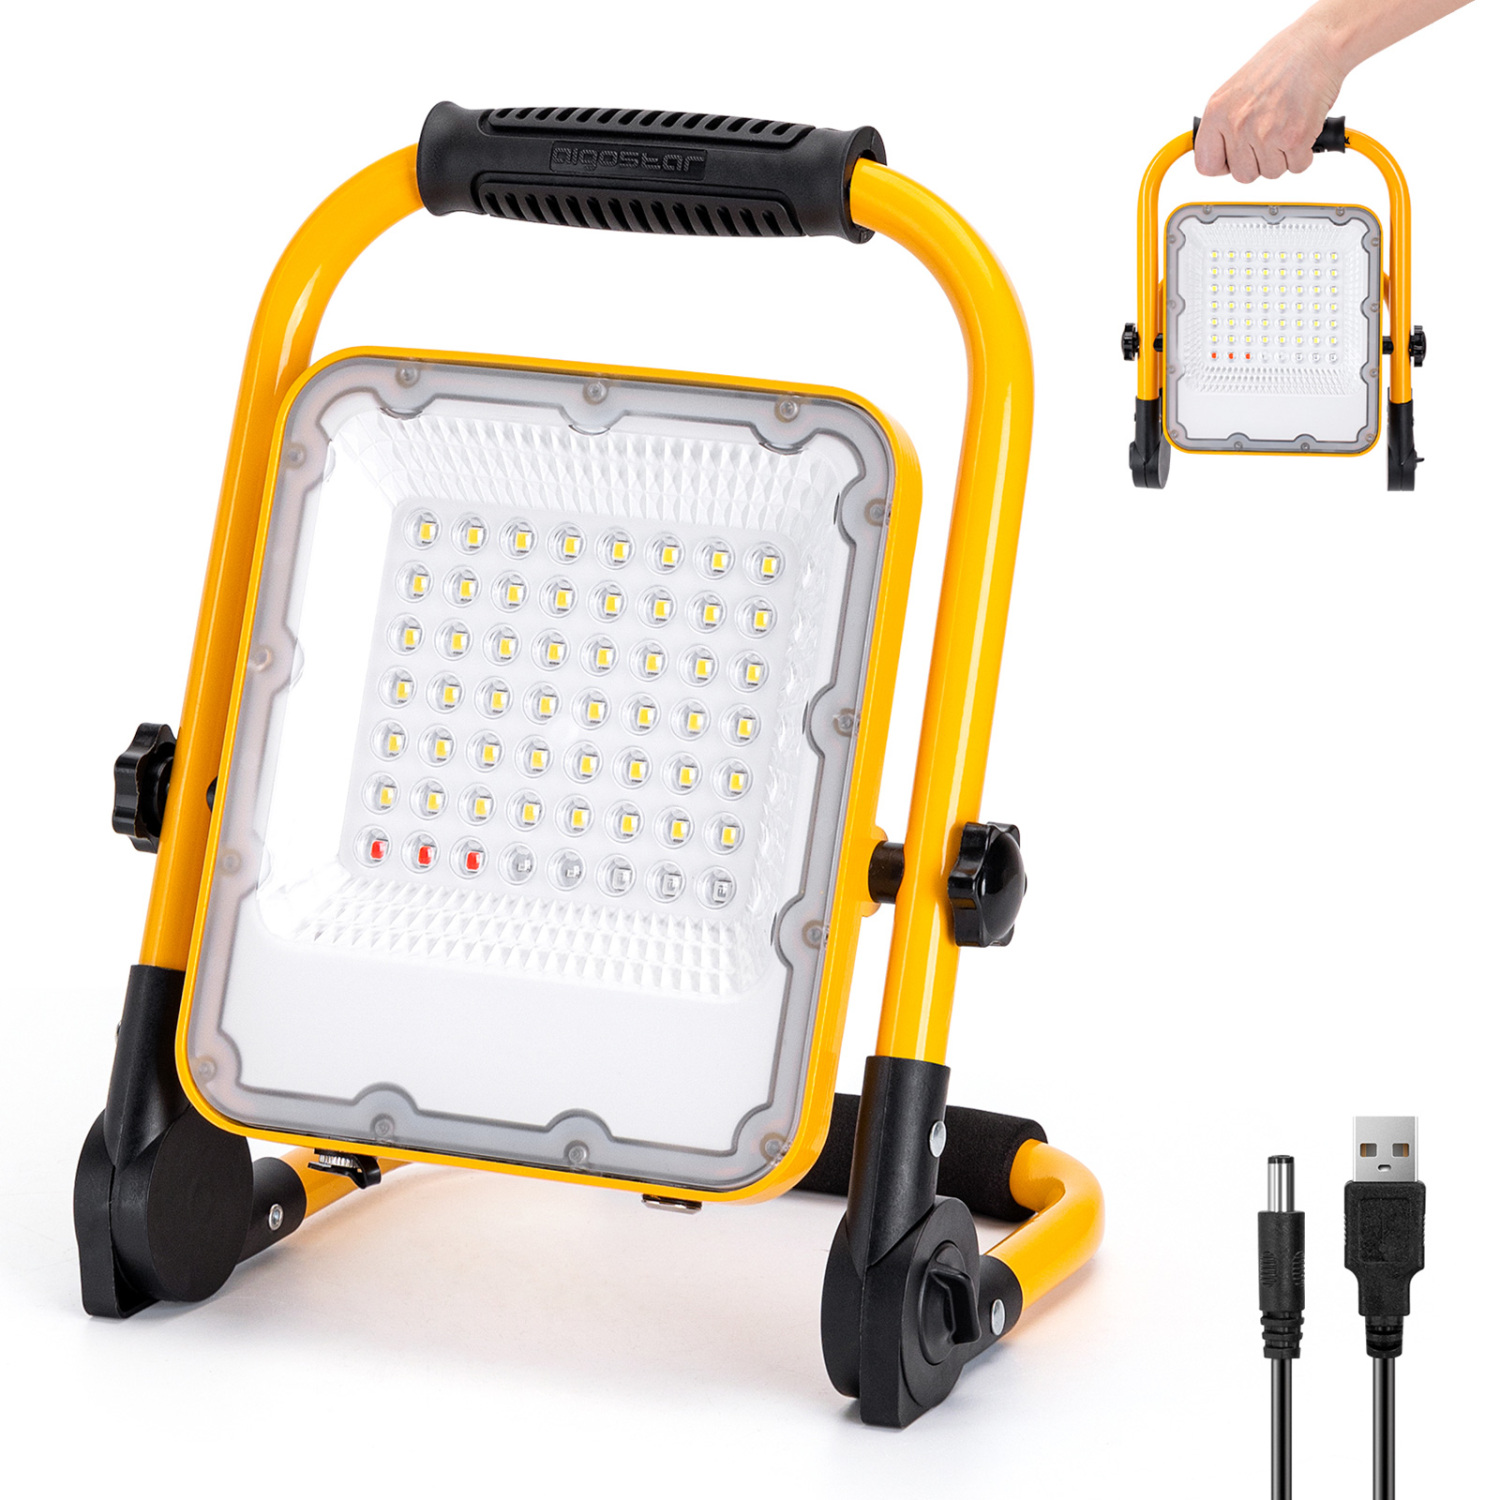 AIGOSTAR 5000LM LED Work Light with USB Charge, IP65 Waterproof, 6500K, 50W Rechargeable Flood Lights with Stand for Workshop, Garage, Camping, Construction Site, Emergency, Job Site Lighting